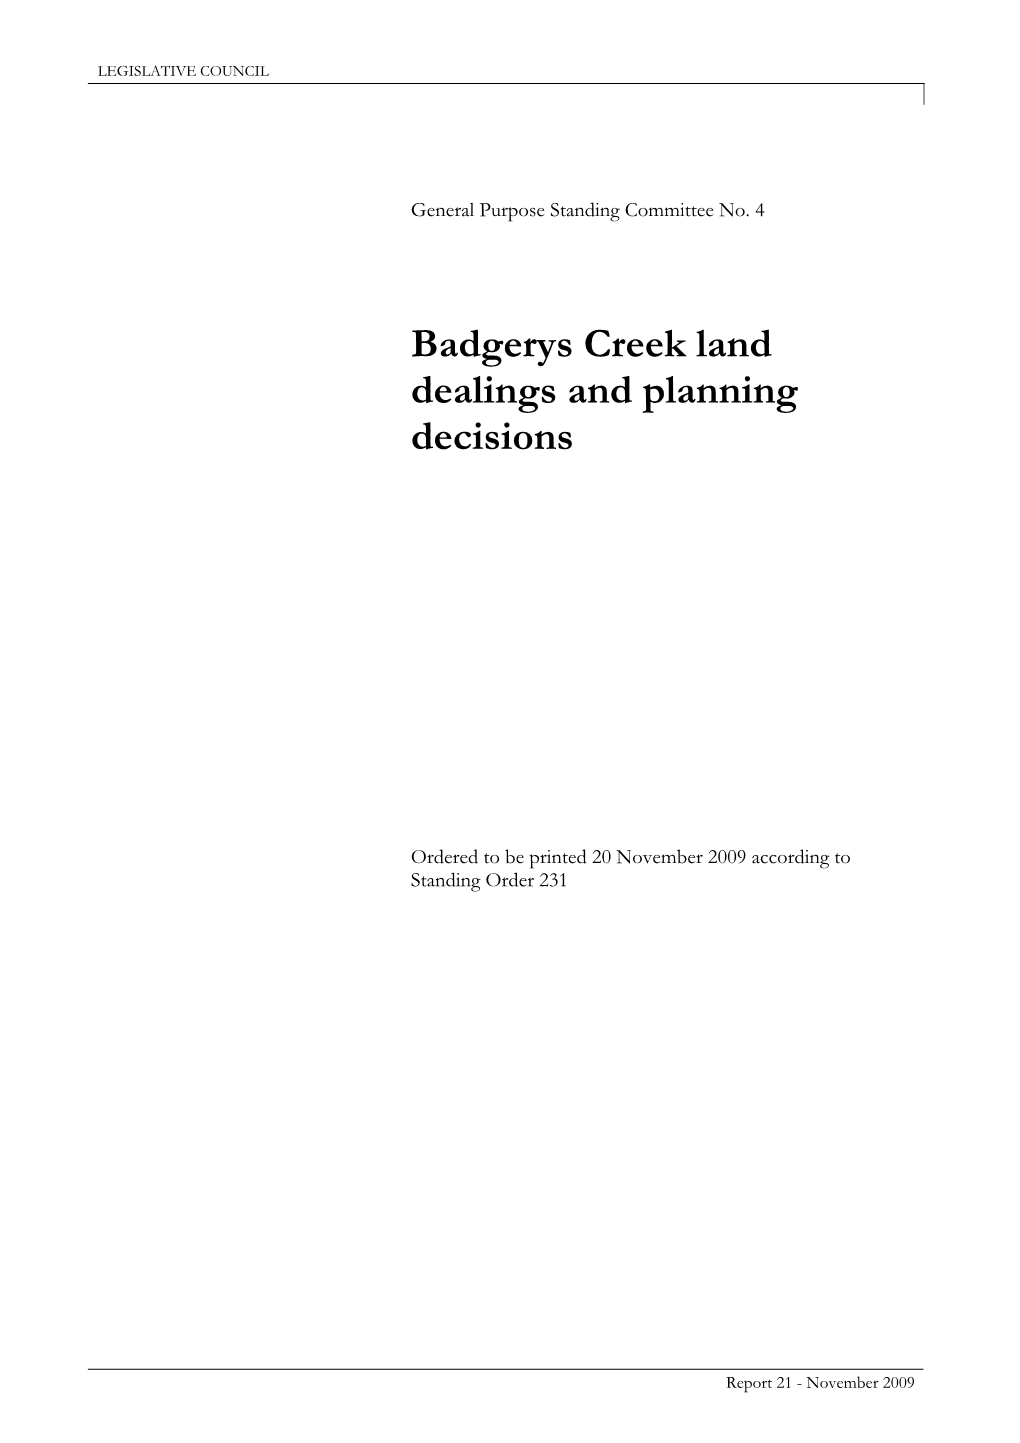 Badgerys Creek Land Dealings and Planning Decisions